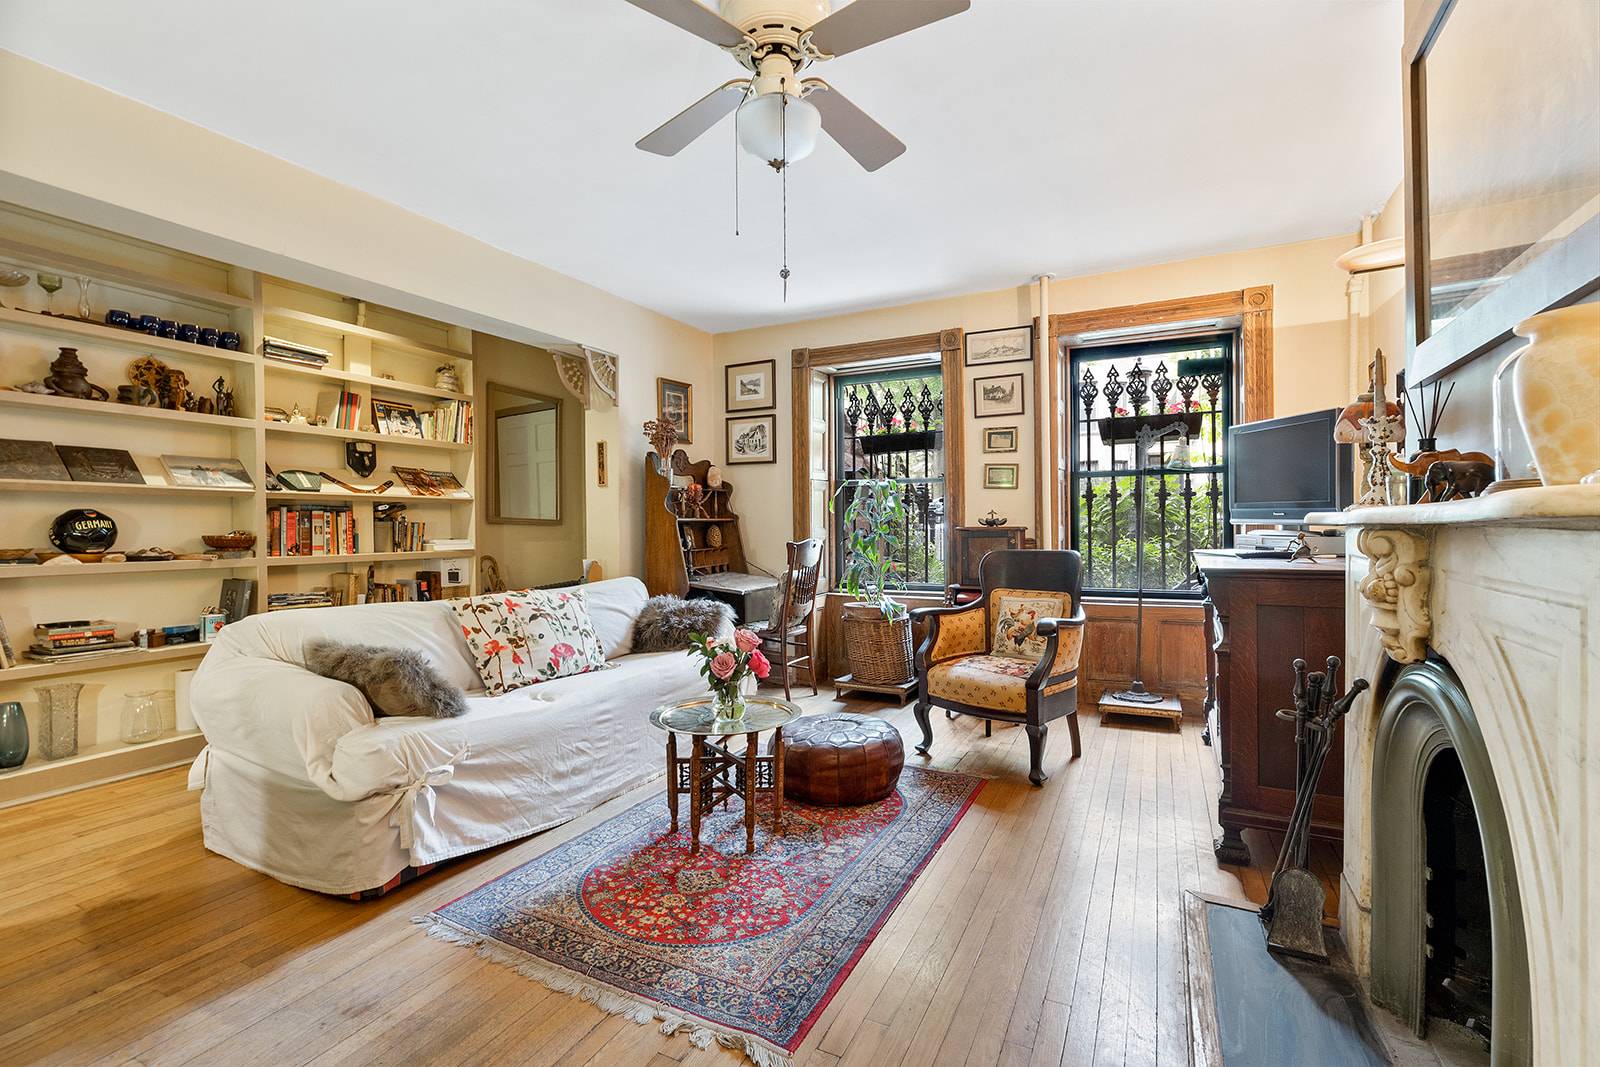 This garden floor thru duplex consists of a spacious one bedroom with home office, centrally located on one of the most beautiful tree lined street in the neighborhood.